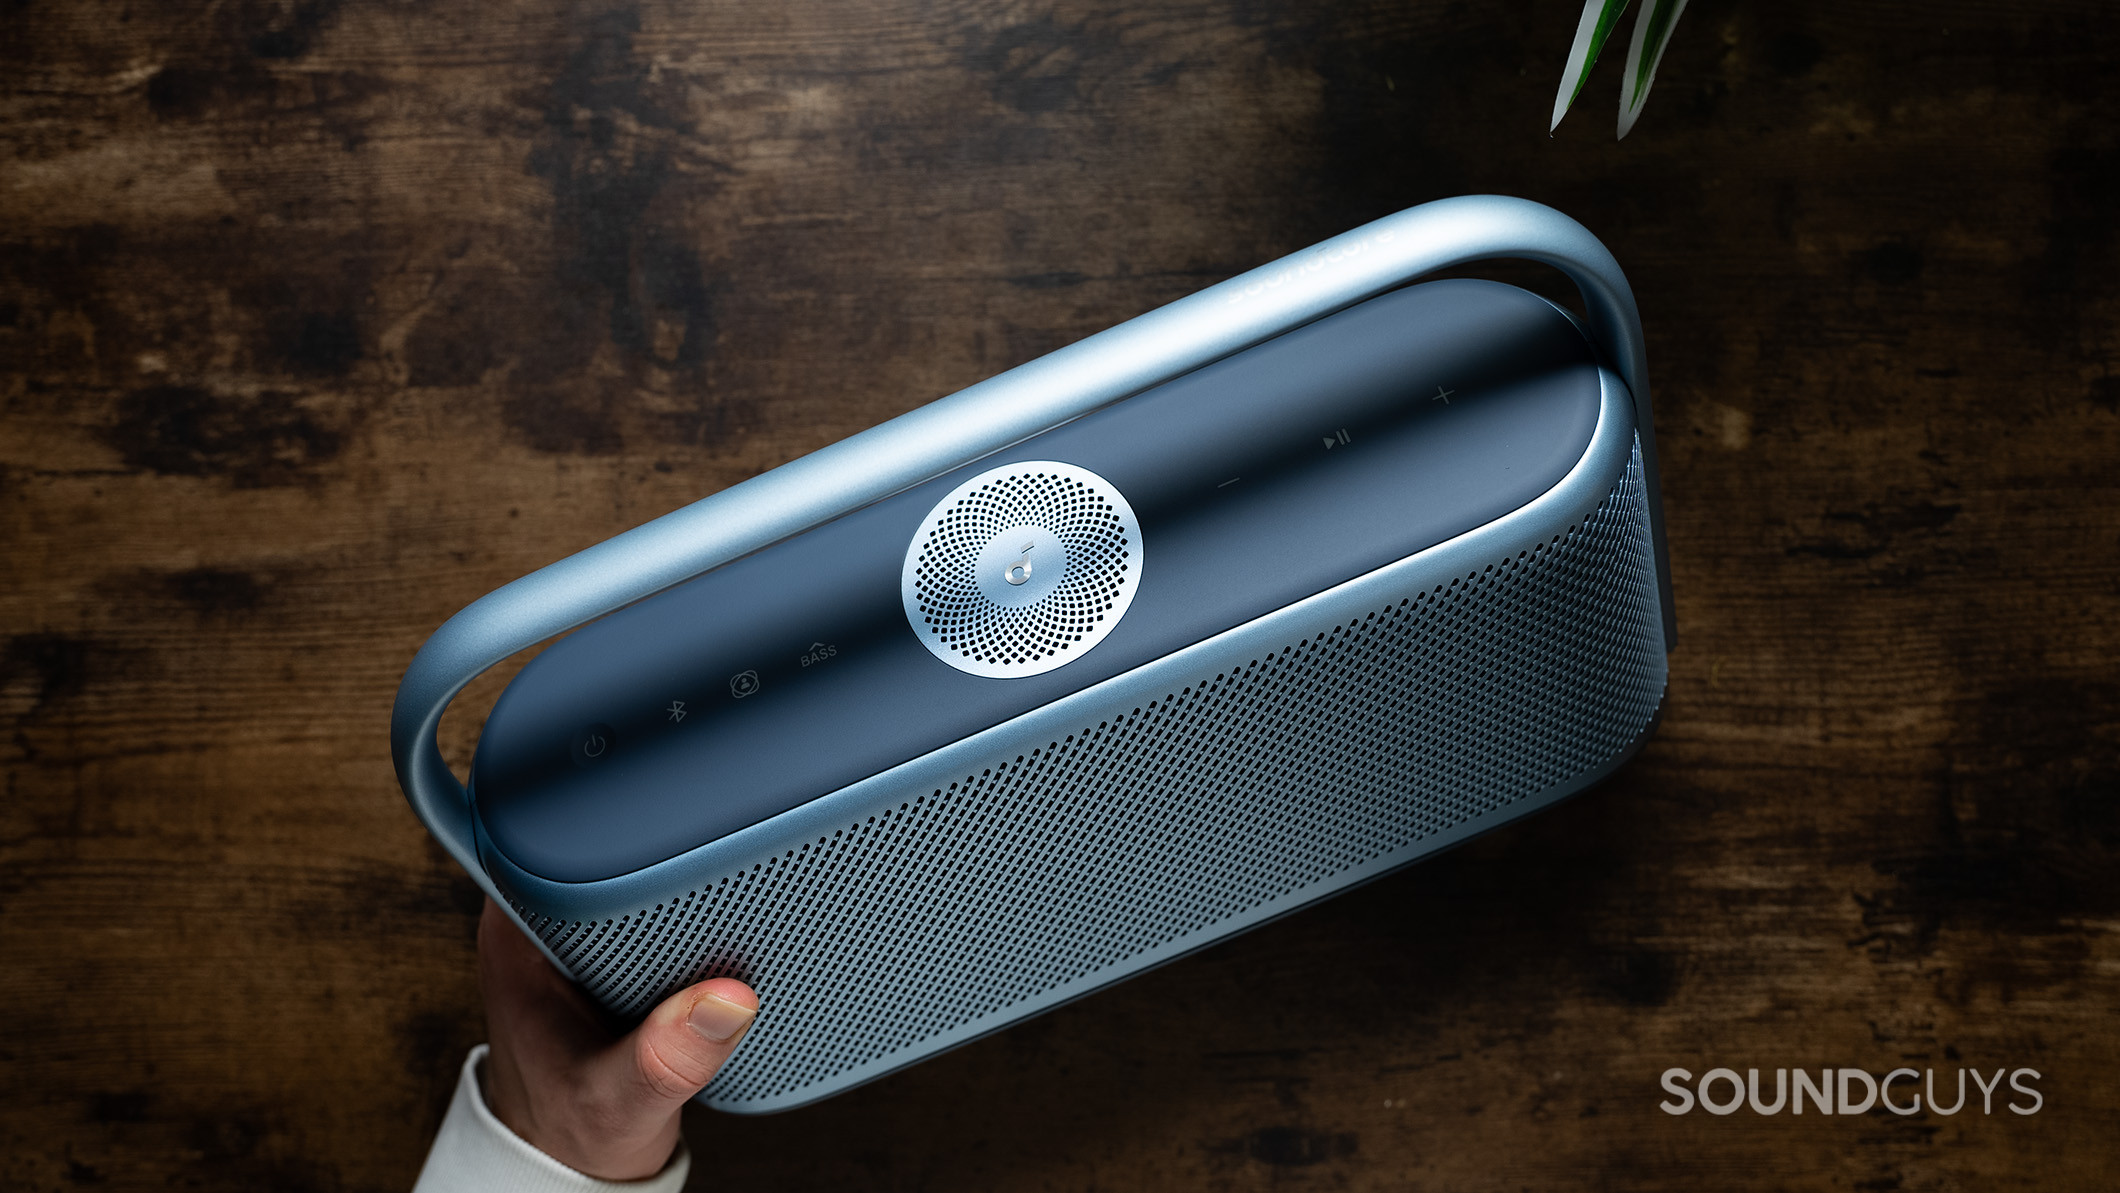 Anker Soundcore Motion X600 speaker held in hand above a table.